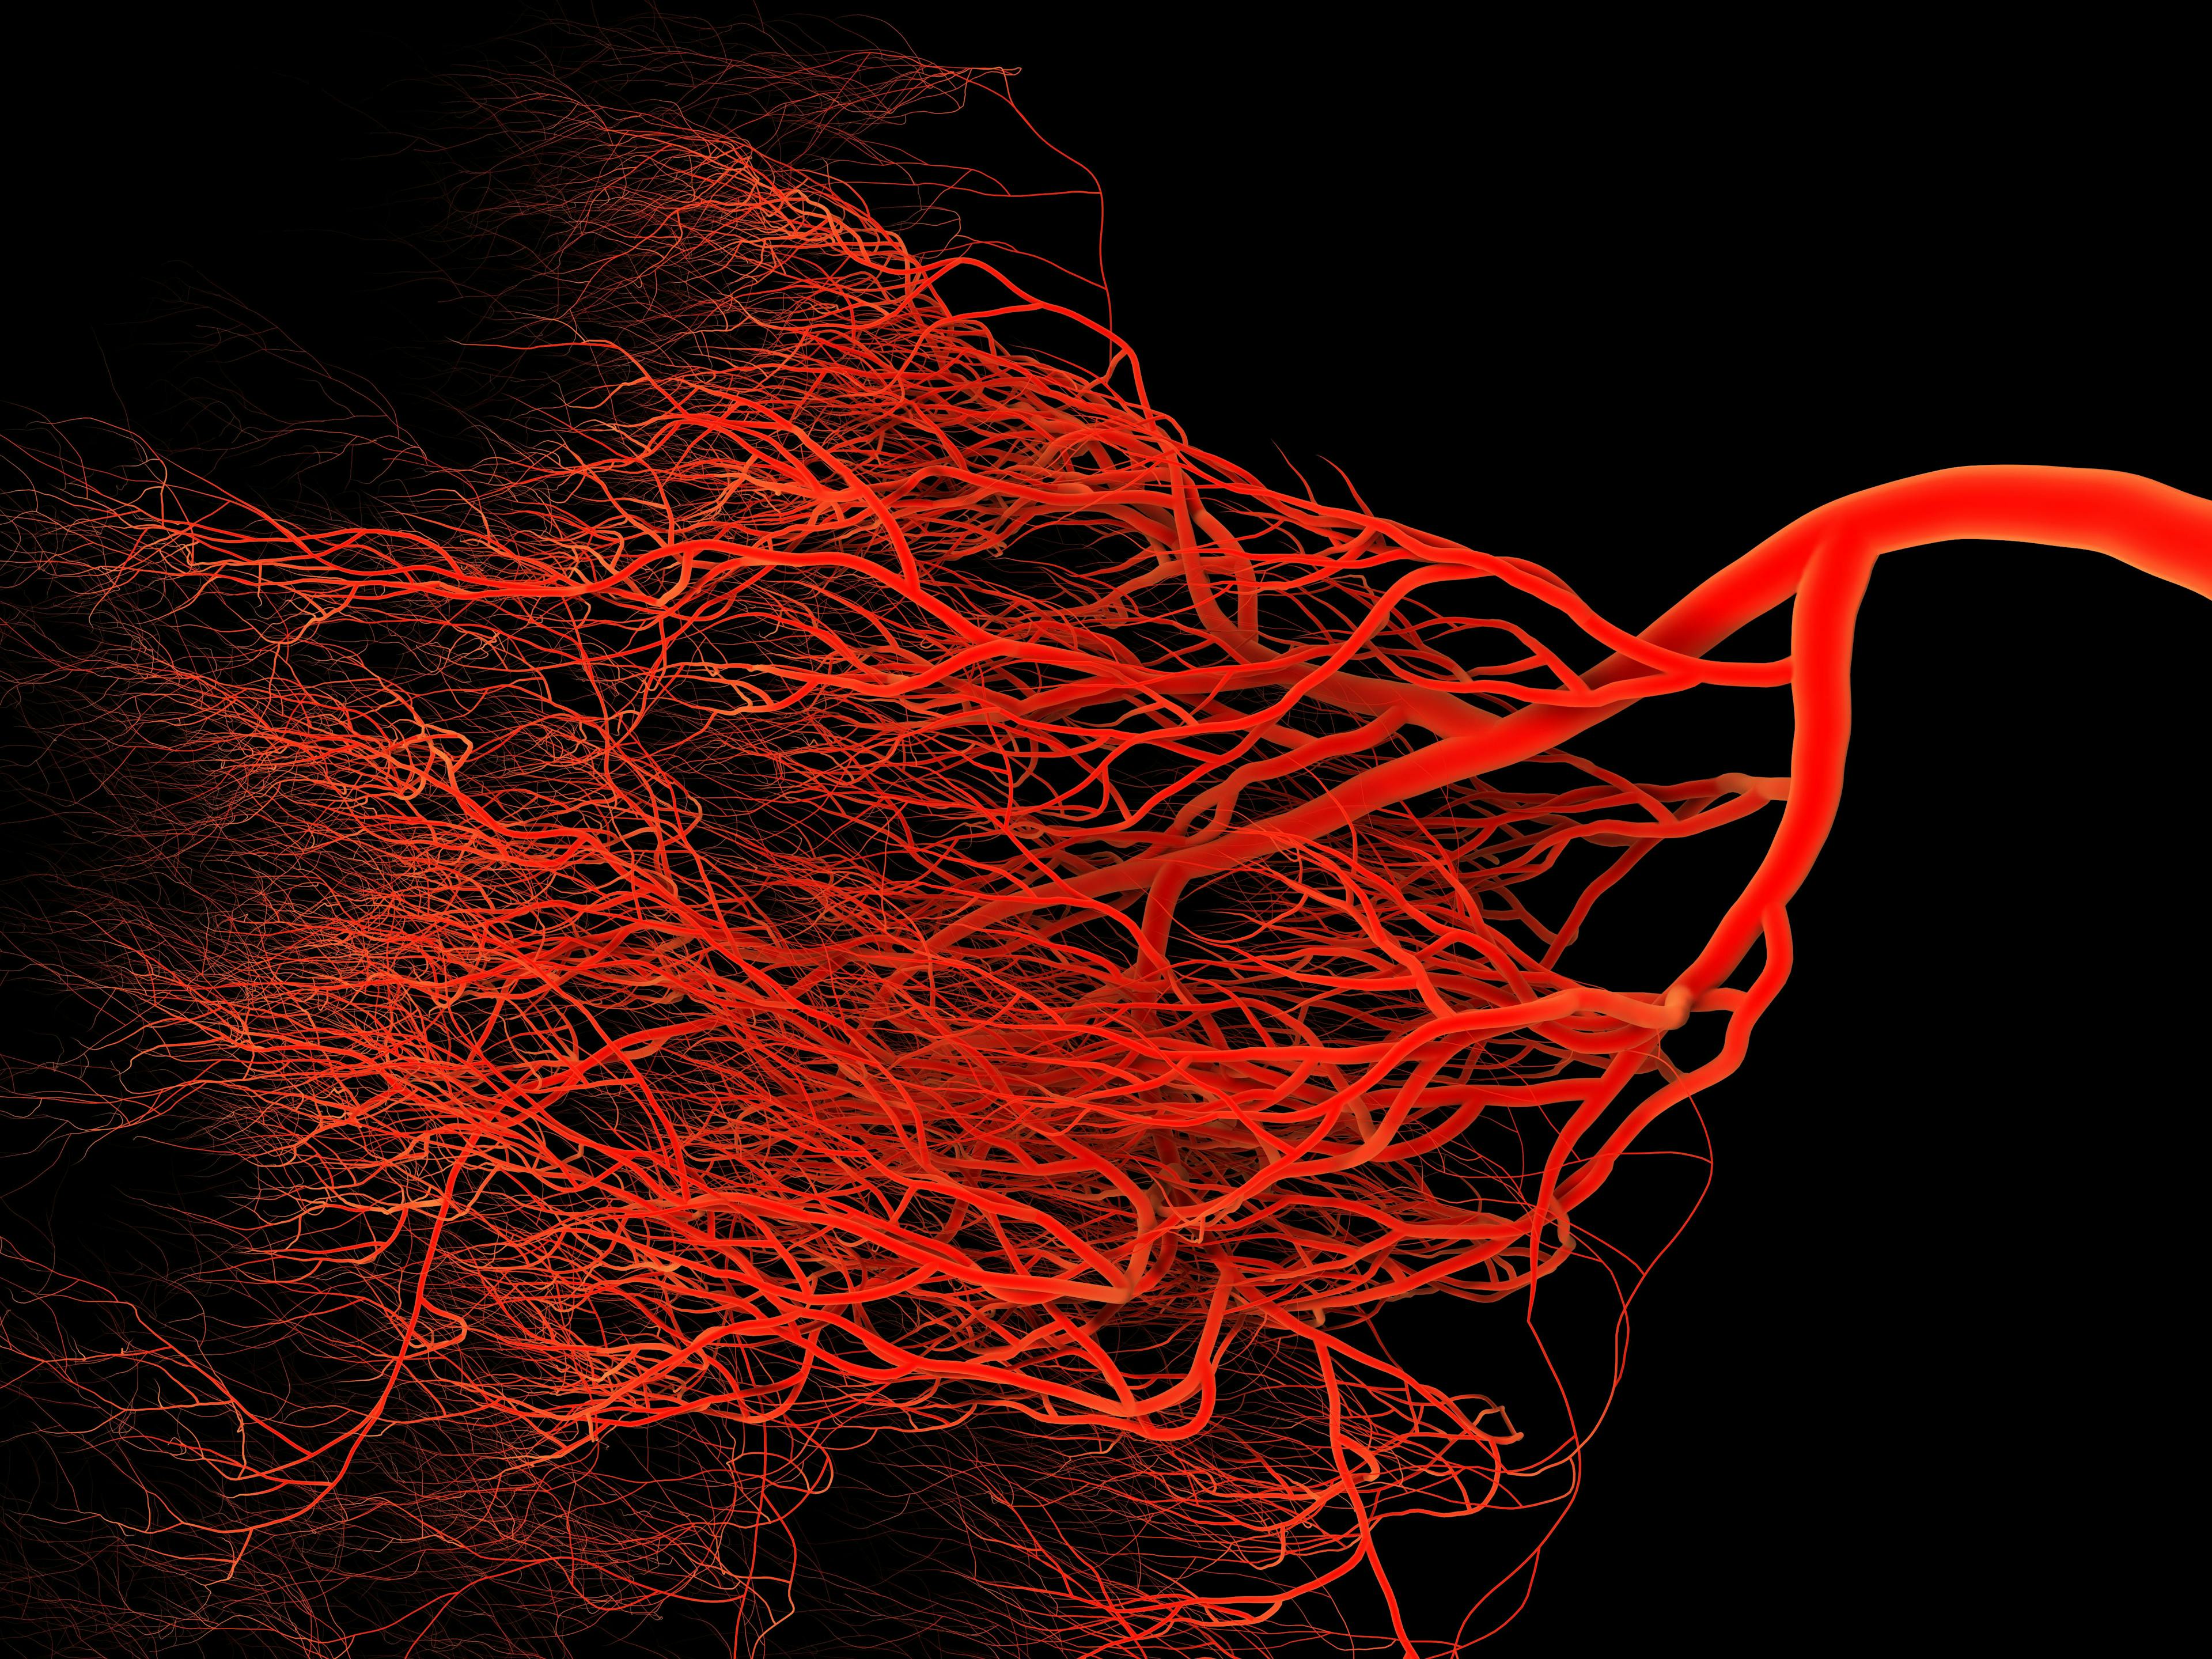 Graphic of blood vessels